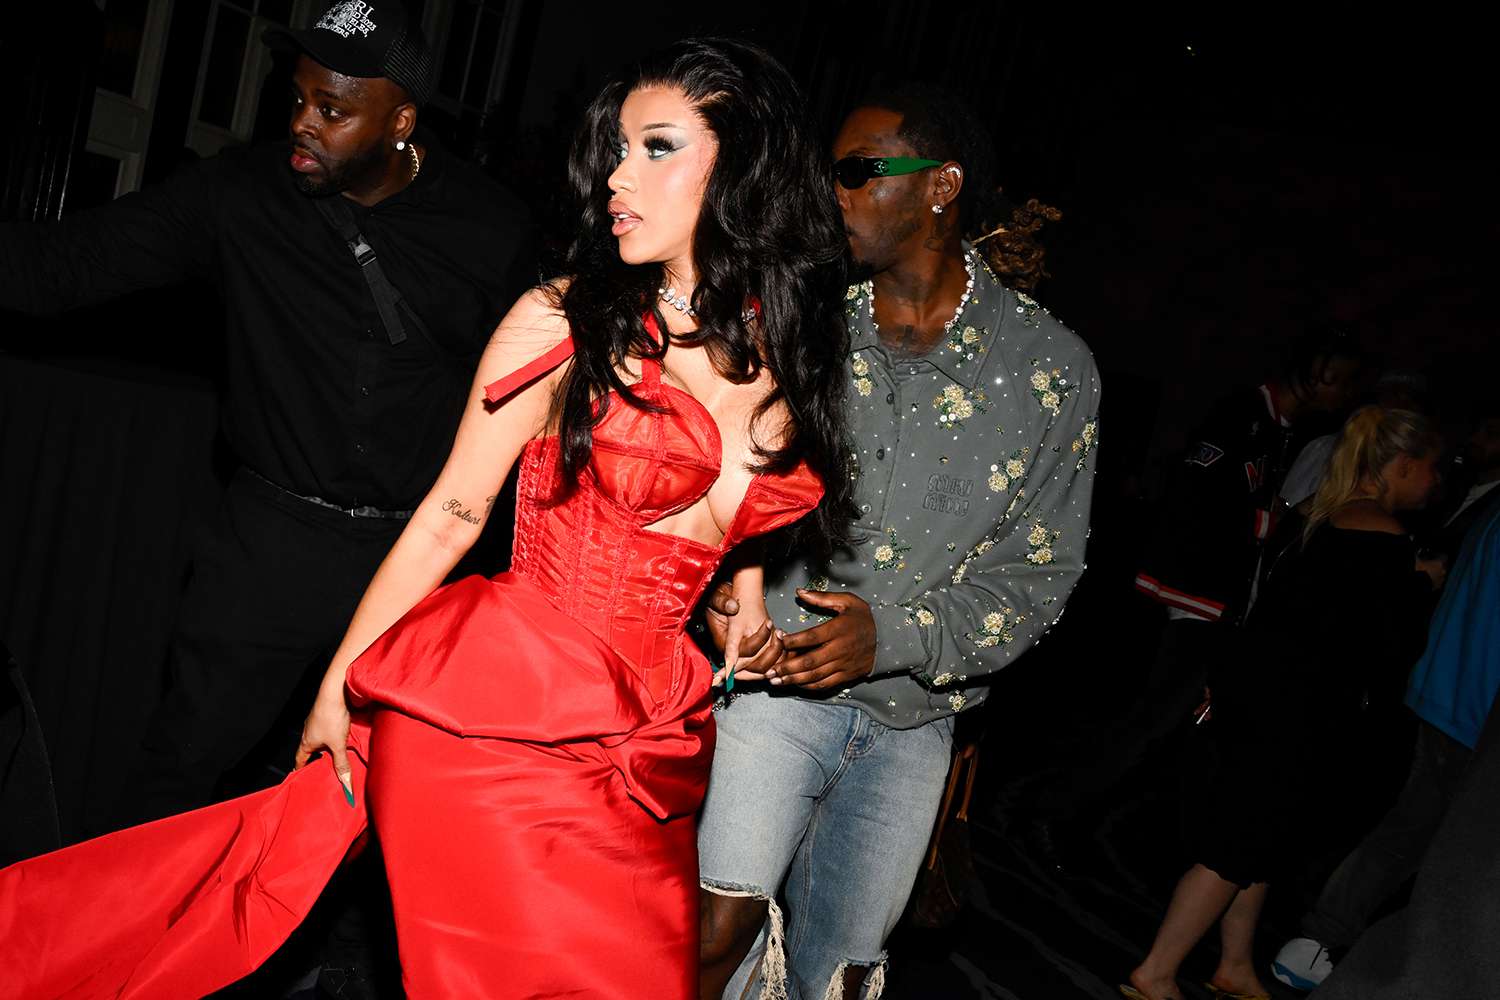 Cardi B and Offset at Richie Akiva's 10th Annual "The After" Met Gala After Party